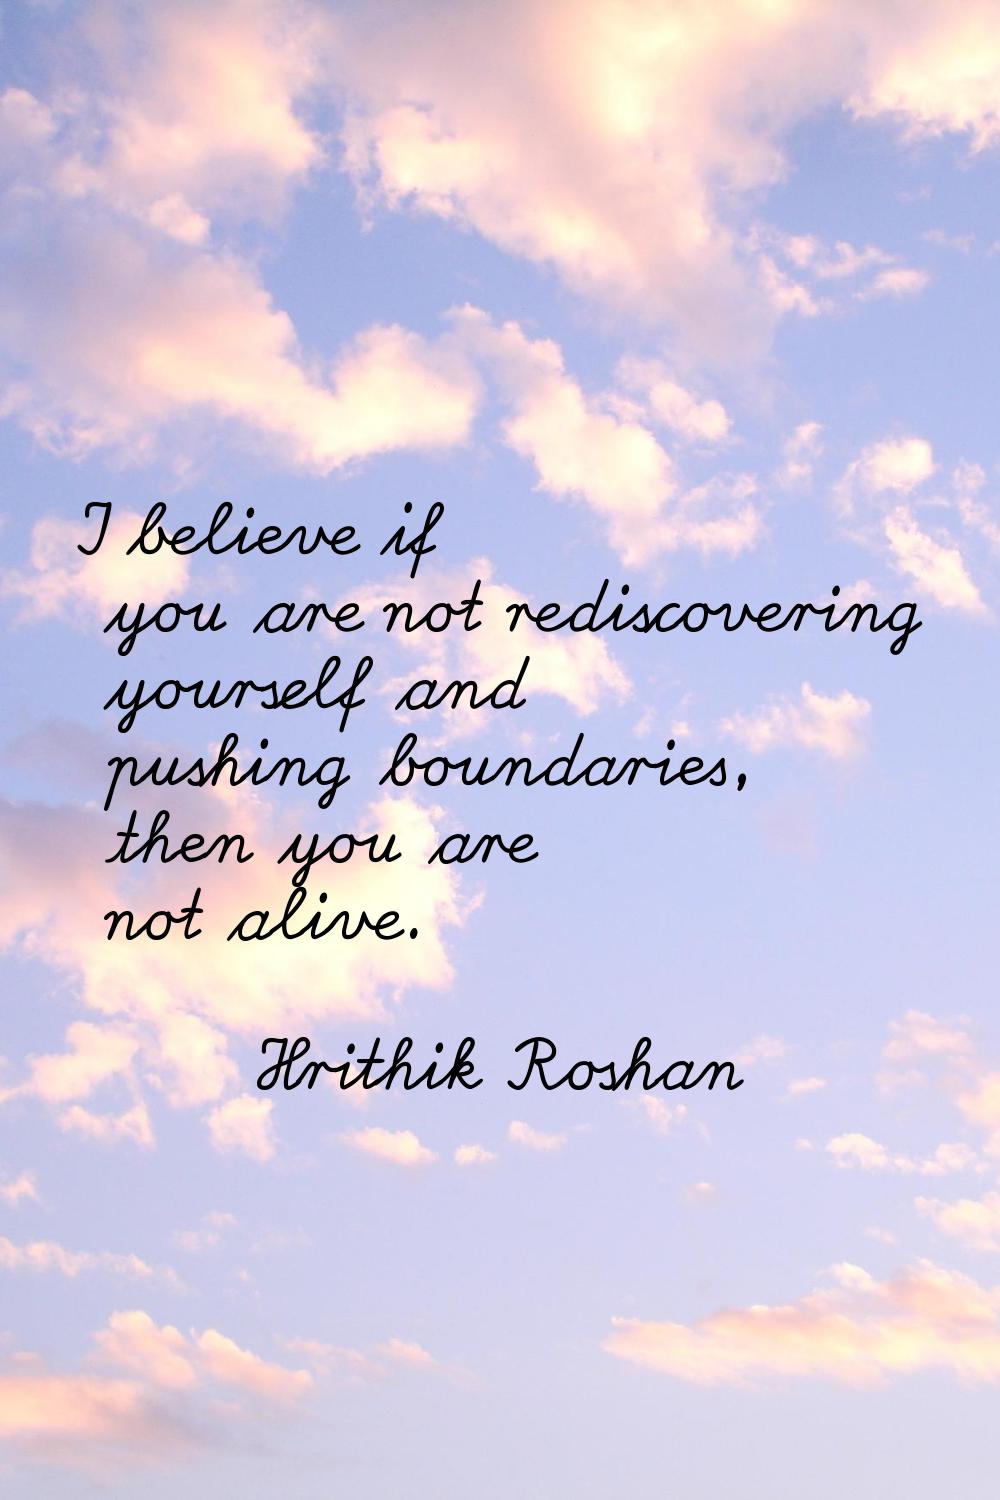 I believe if you are not rediscovering yourself and pushing boundaries, then you are not alive.